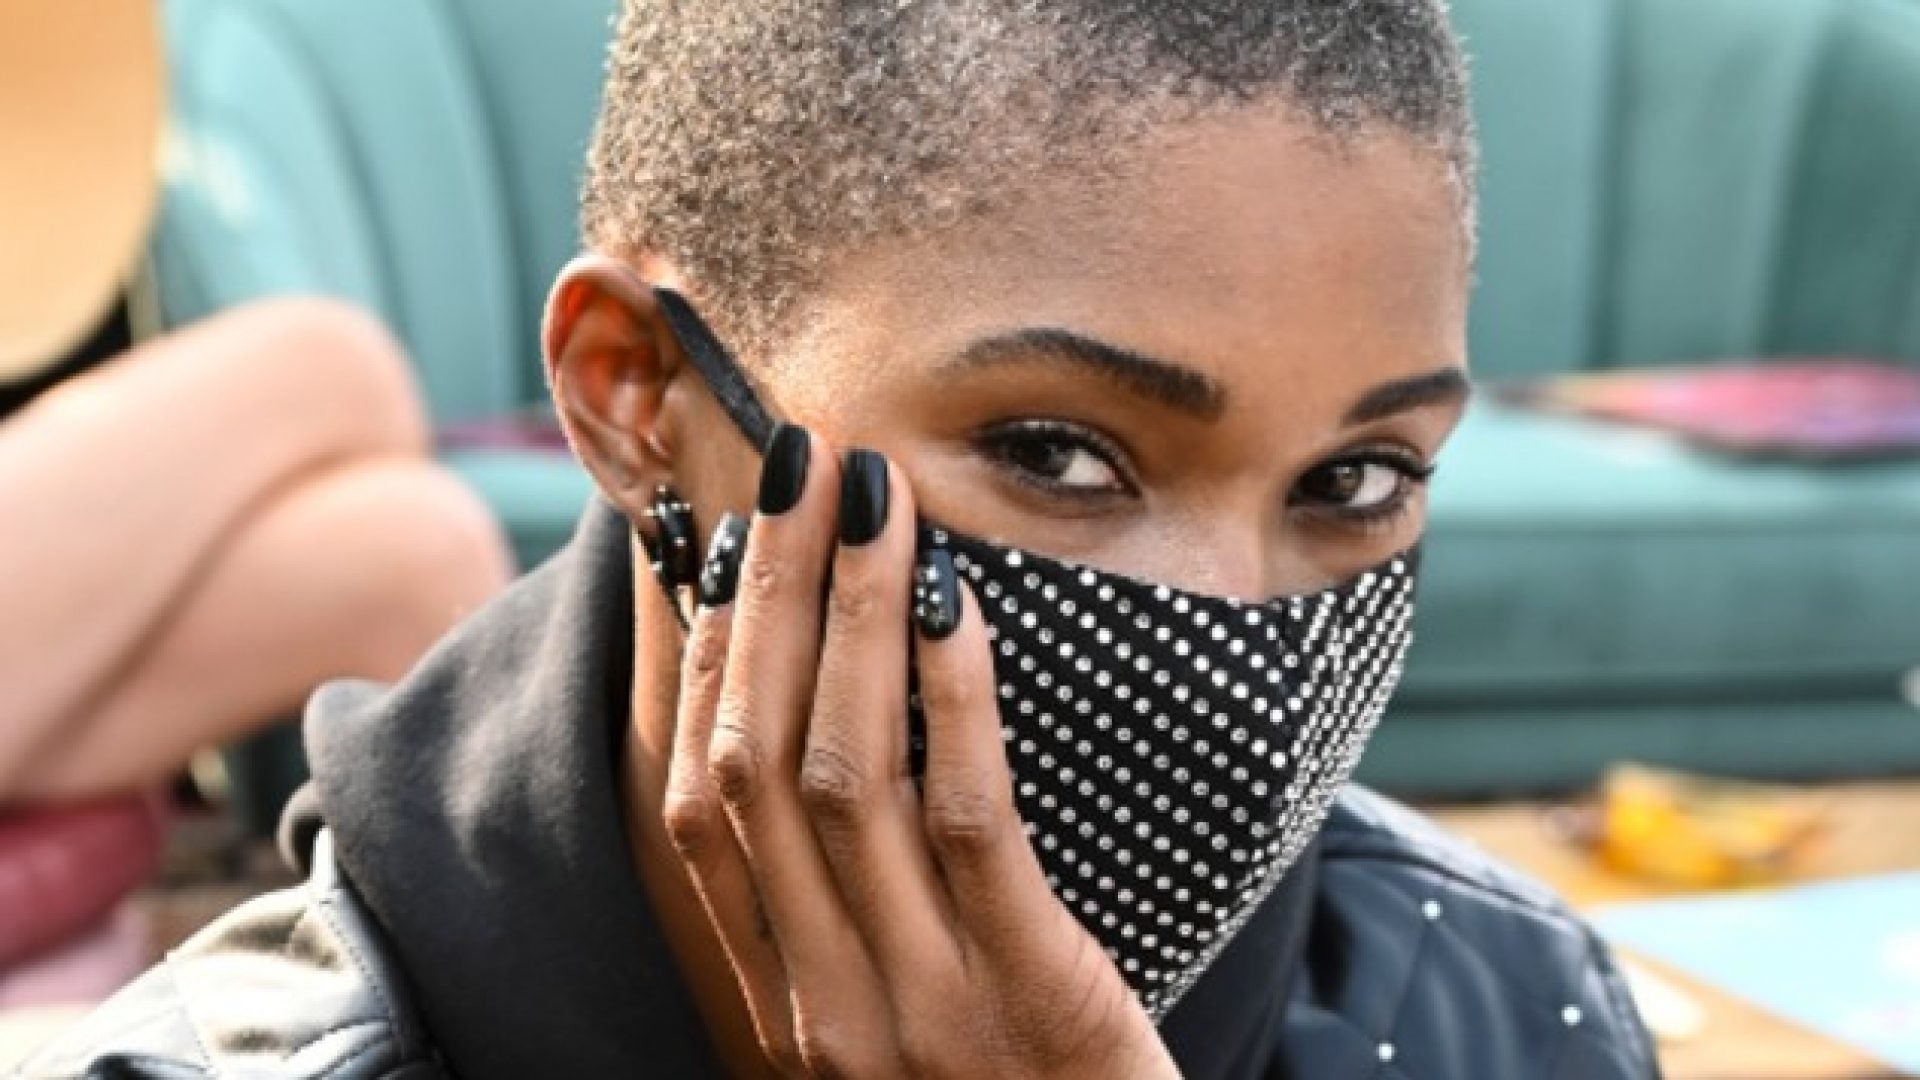 Gina Edwards On How To Recreate The Nail Look From Rebecca Minkoff's NYFW Fall 2020 Presentation